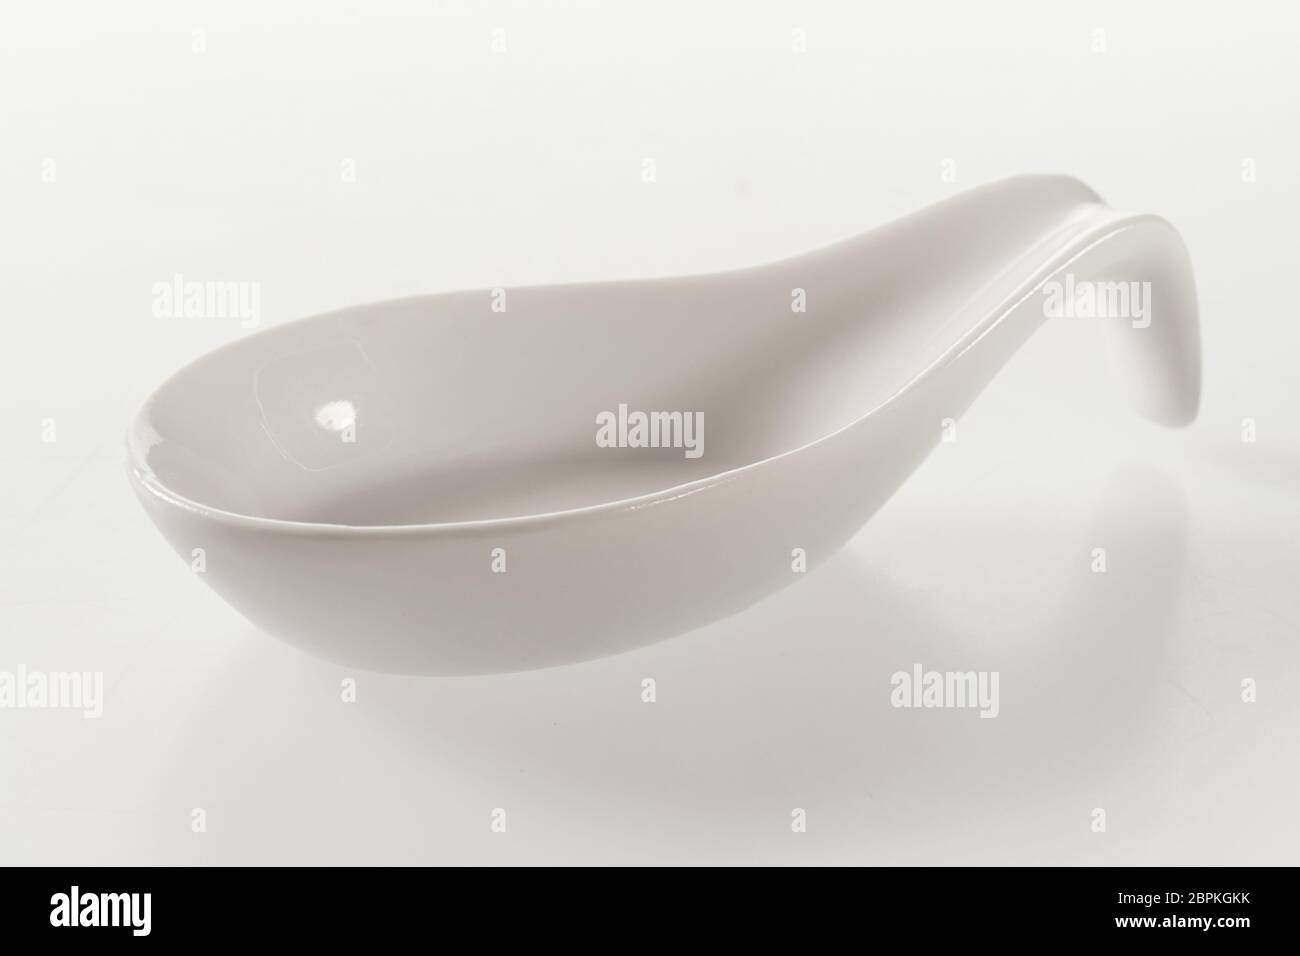 Clean empty white ceramic spoon for food presentation and styling diagonally on a white background with reflection Stock Photo